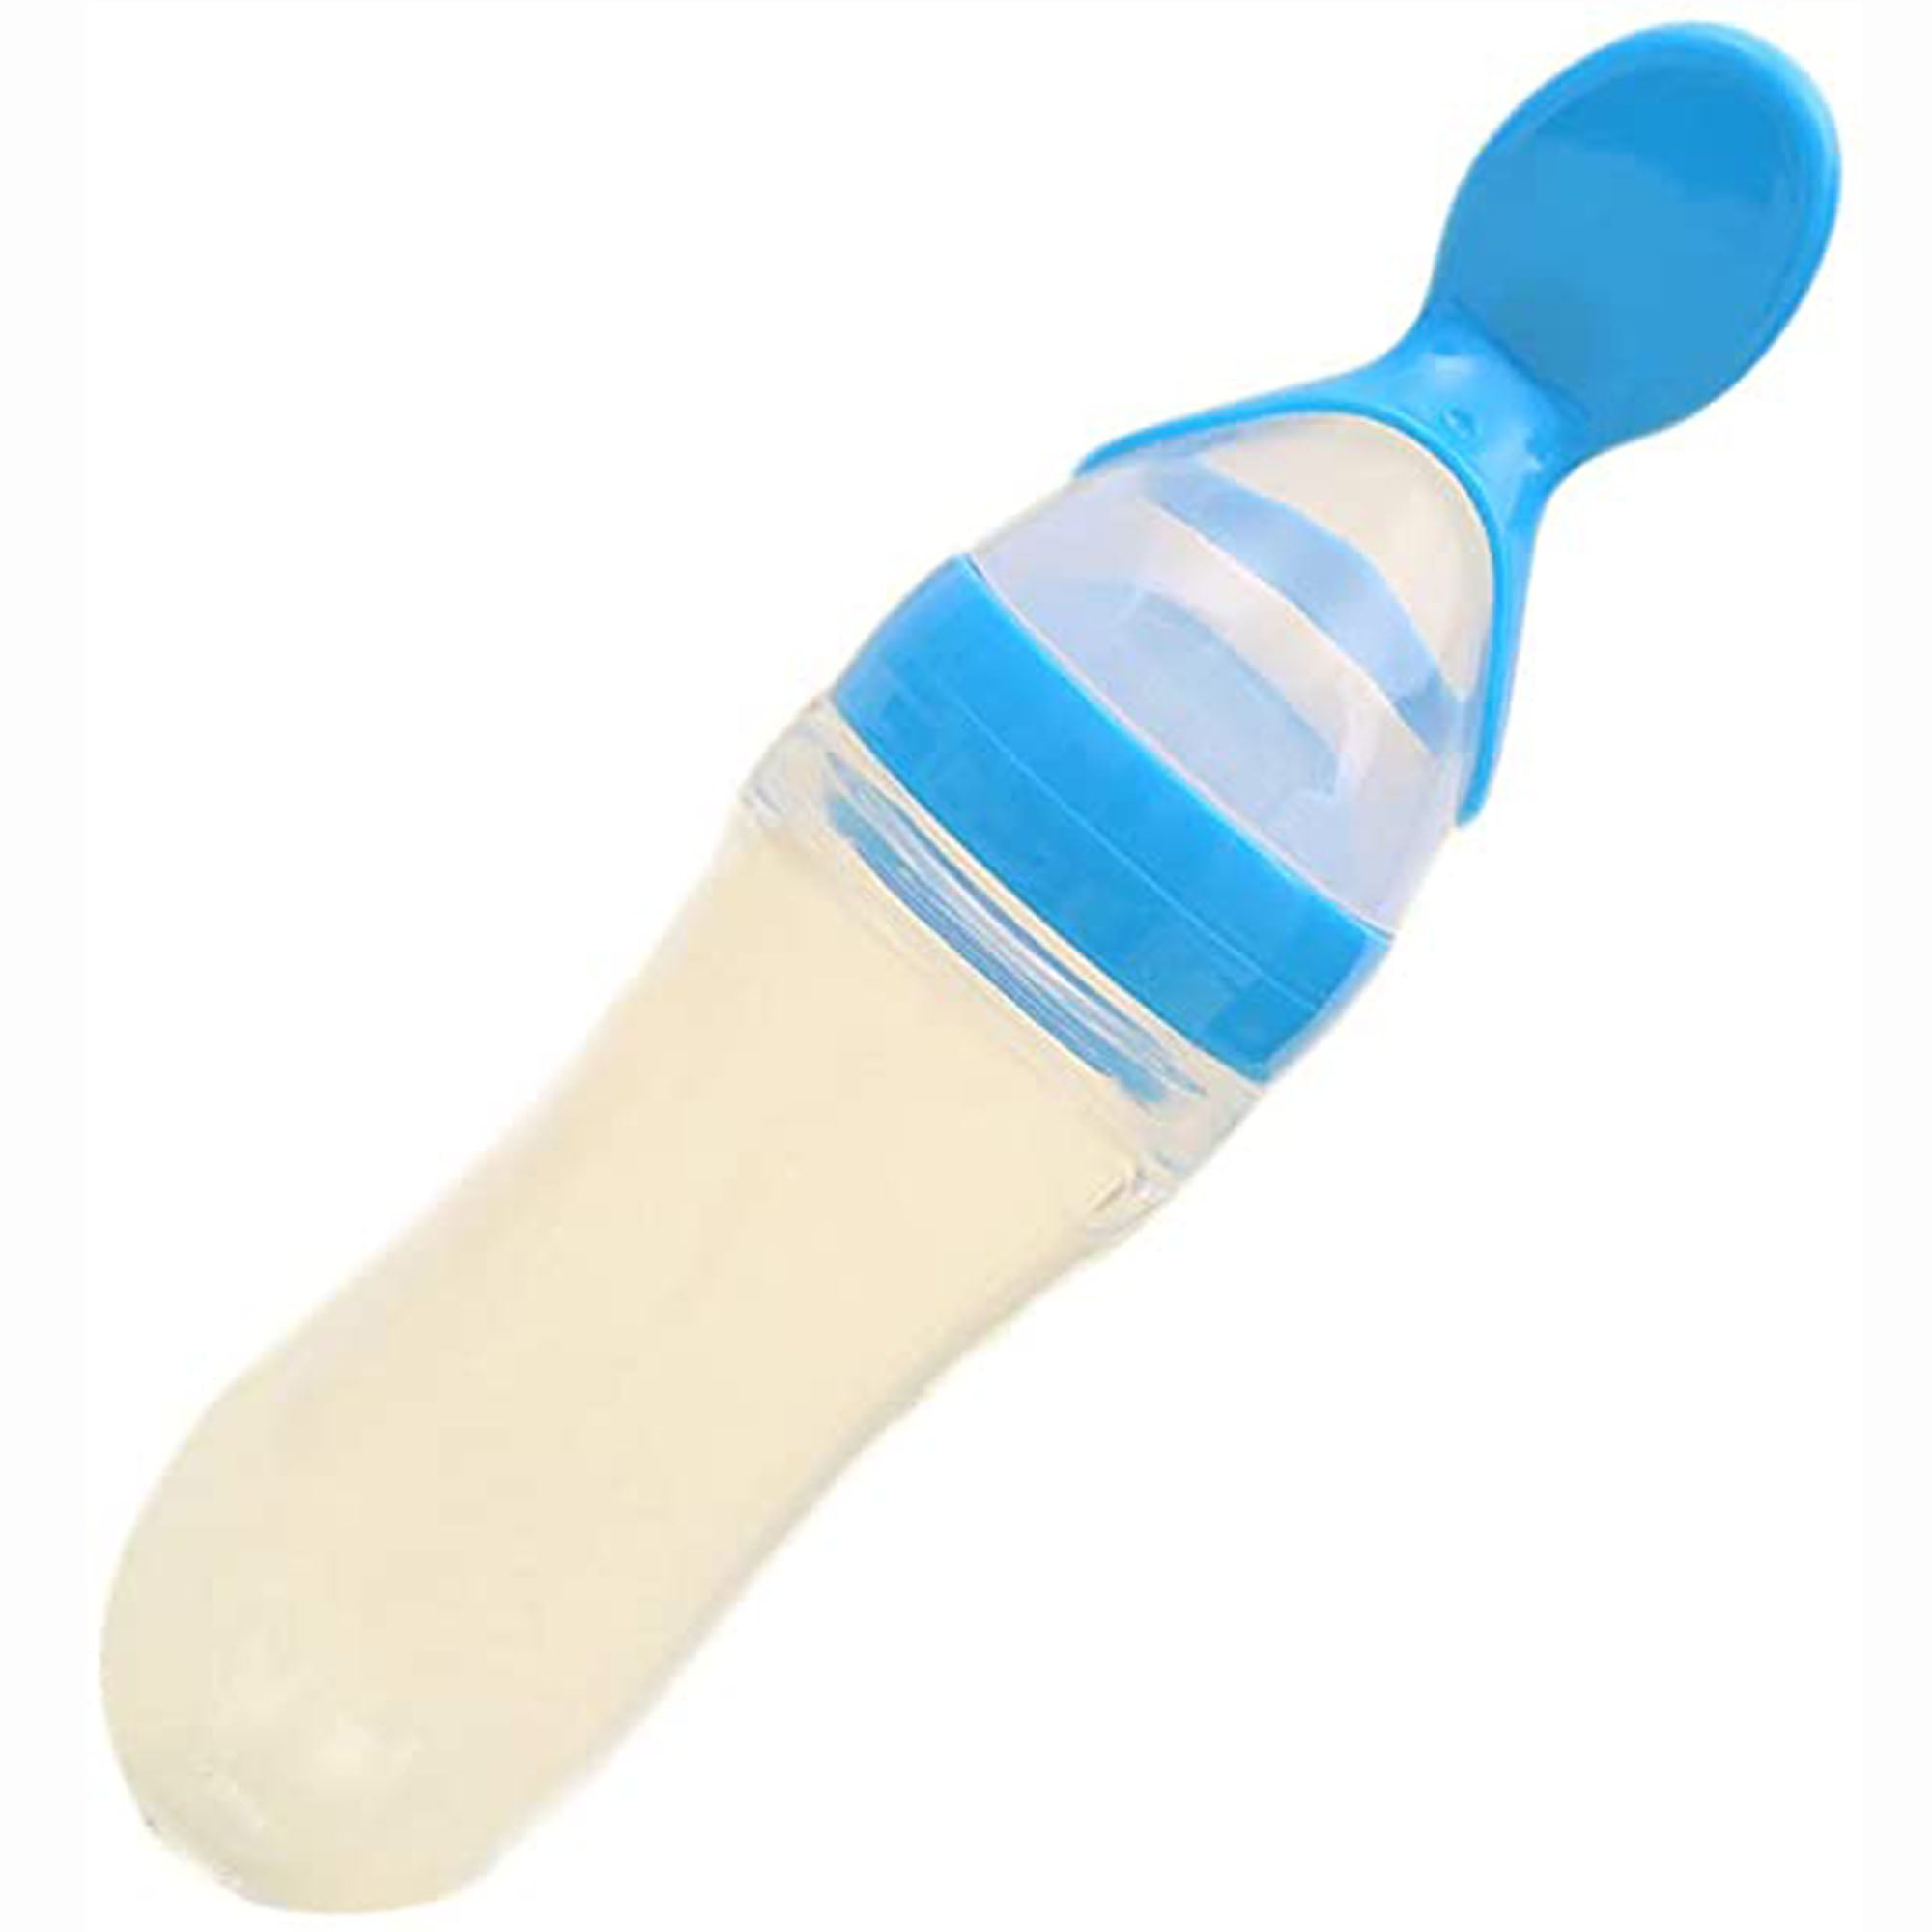 1Pc Infant Baby Silicone Feeding With Spoon Feeder Food Rice Cereal Bottle New 